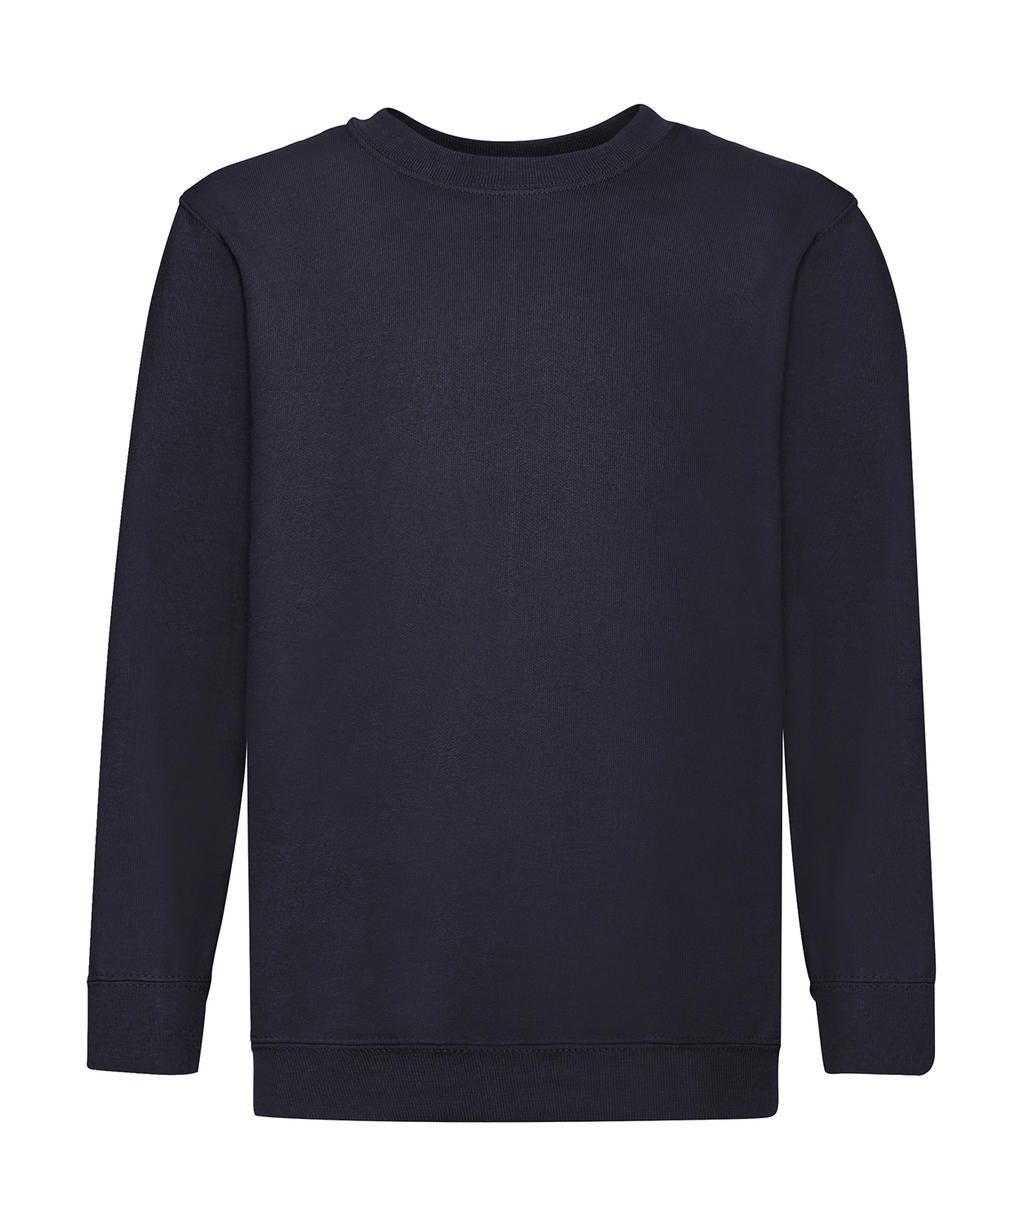  Kids Classic Set-In Sweat in Farbe Deep Navy